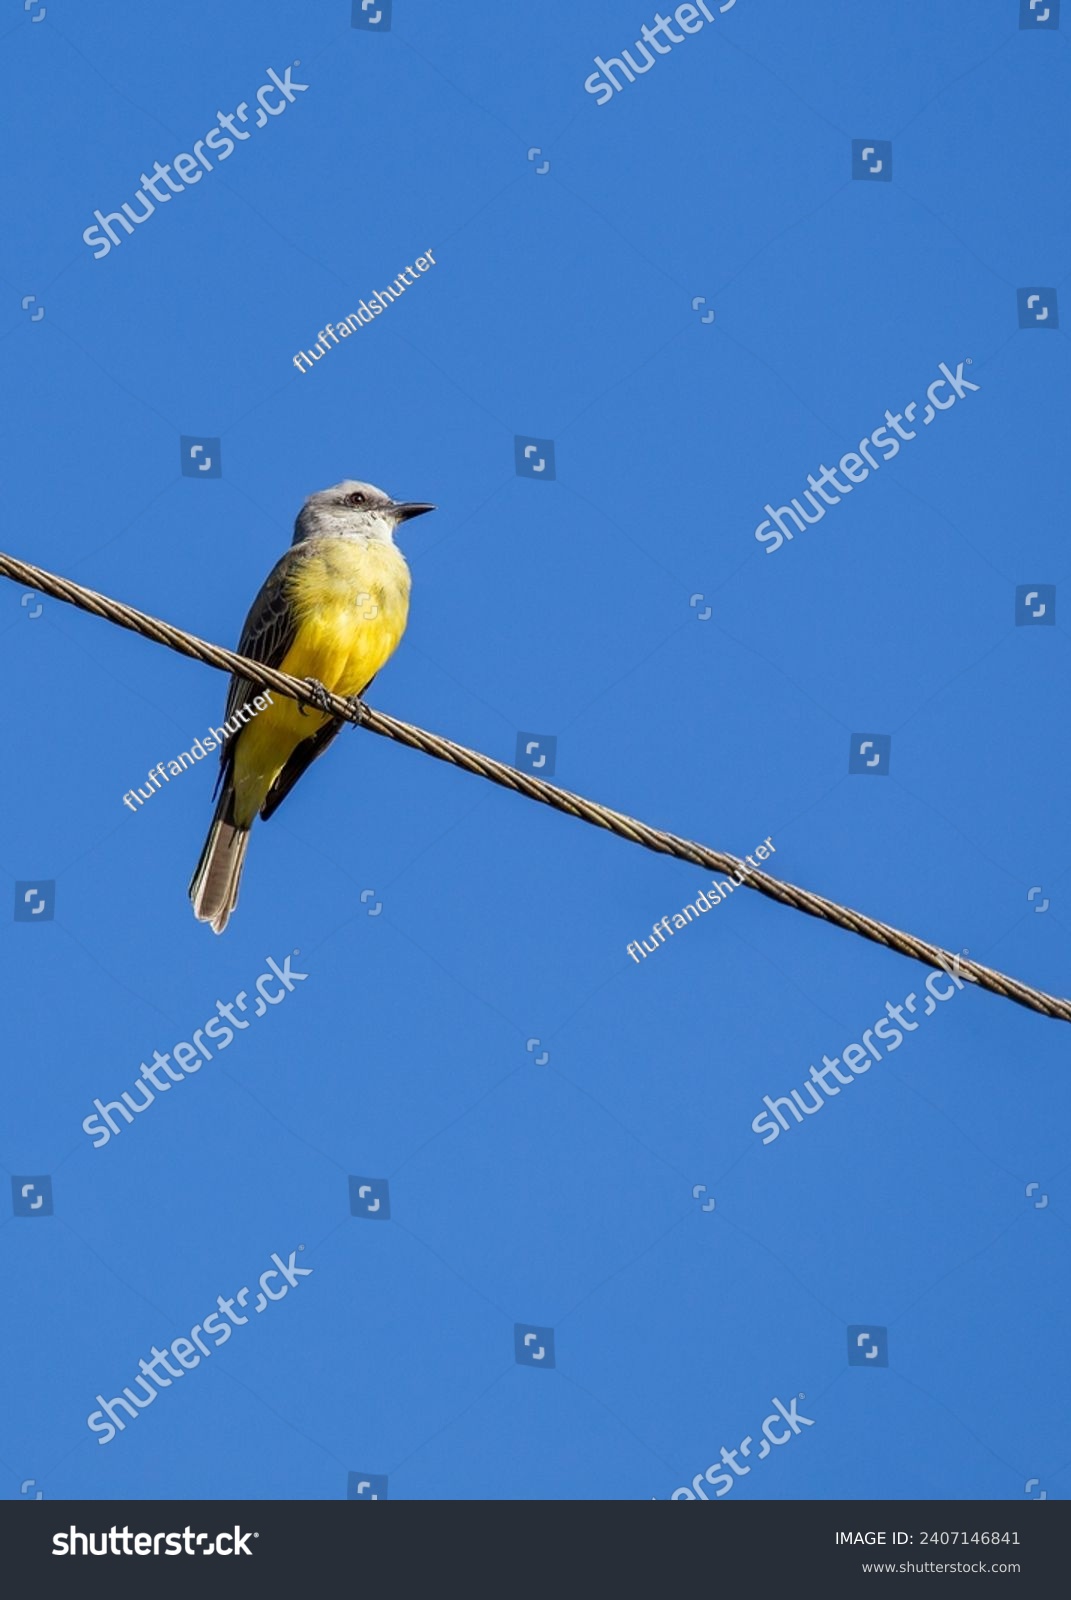 Myiozetetes similis, the Social Flycatcher, graces Central and South American habitats with its sociable nature. This small bird adds liveliness to the diverse tapestry of tropical landscapes. #2407146841